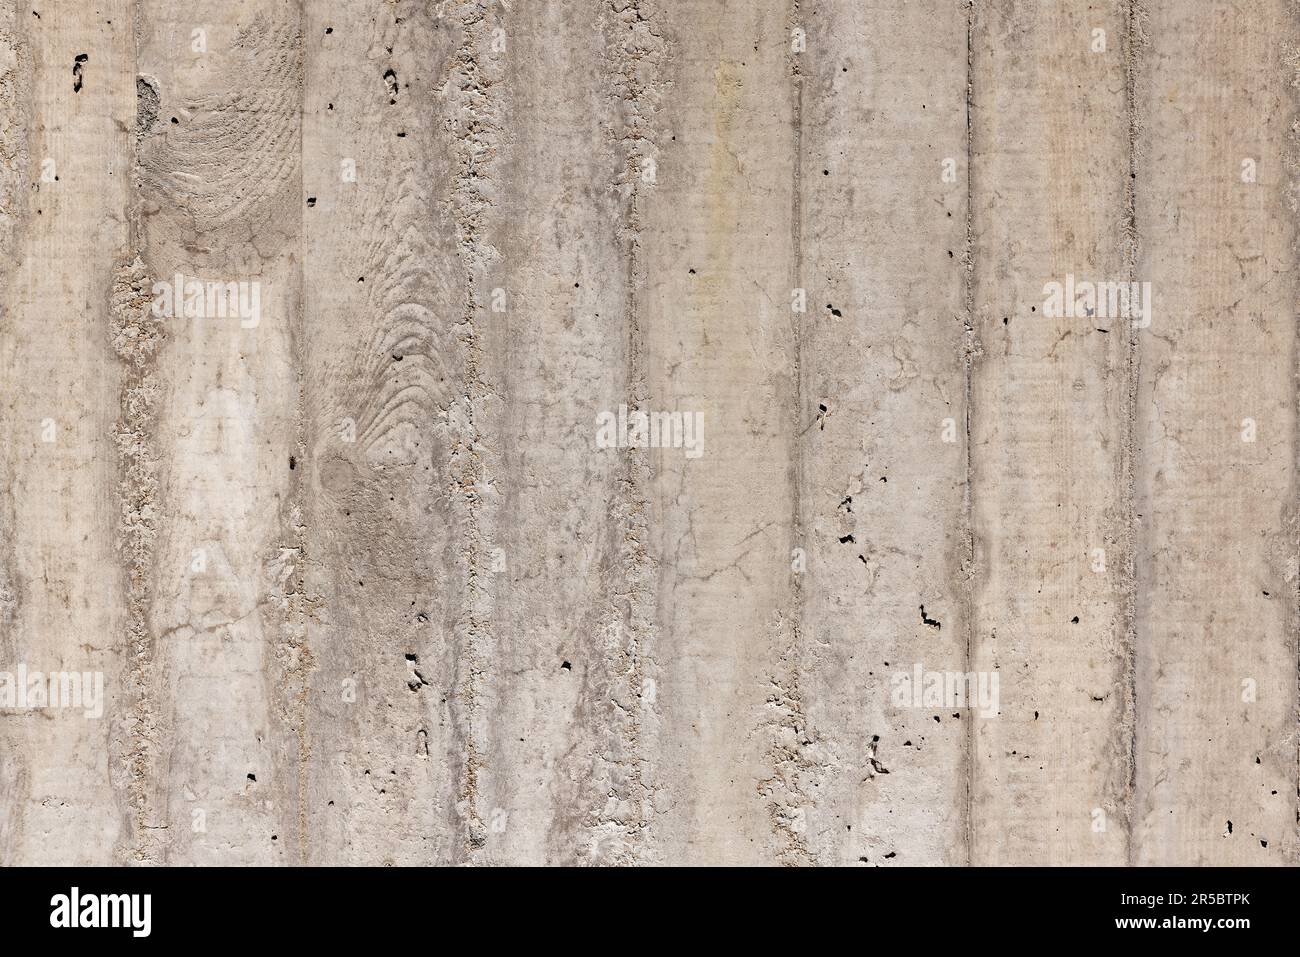 Grey-Brown Fair Faced Concrete Wall with Wood Linings Imprints Stock Photo